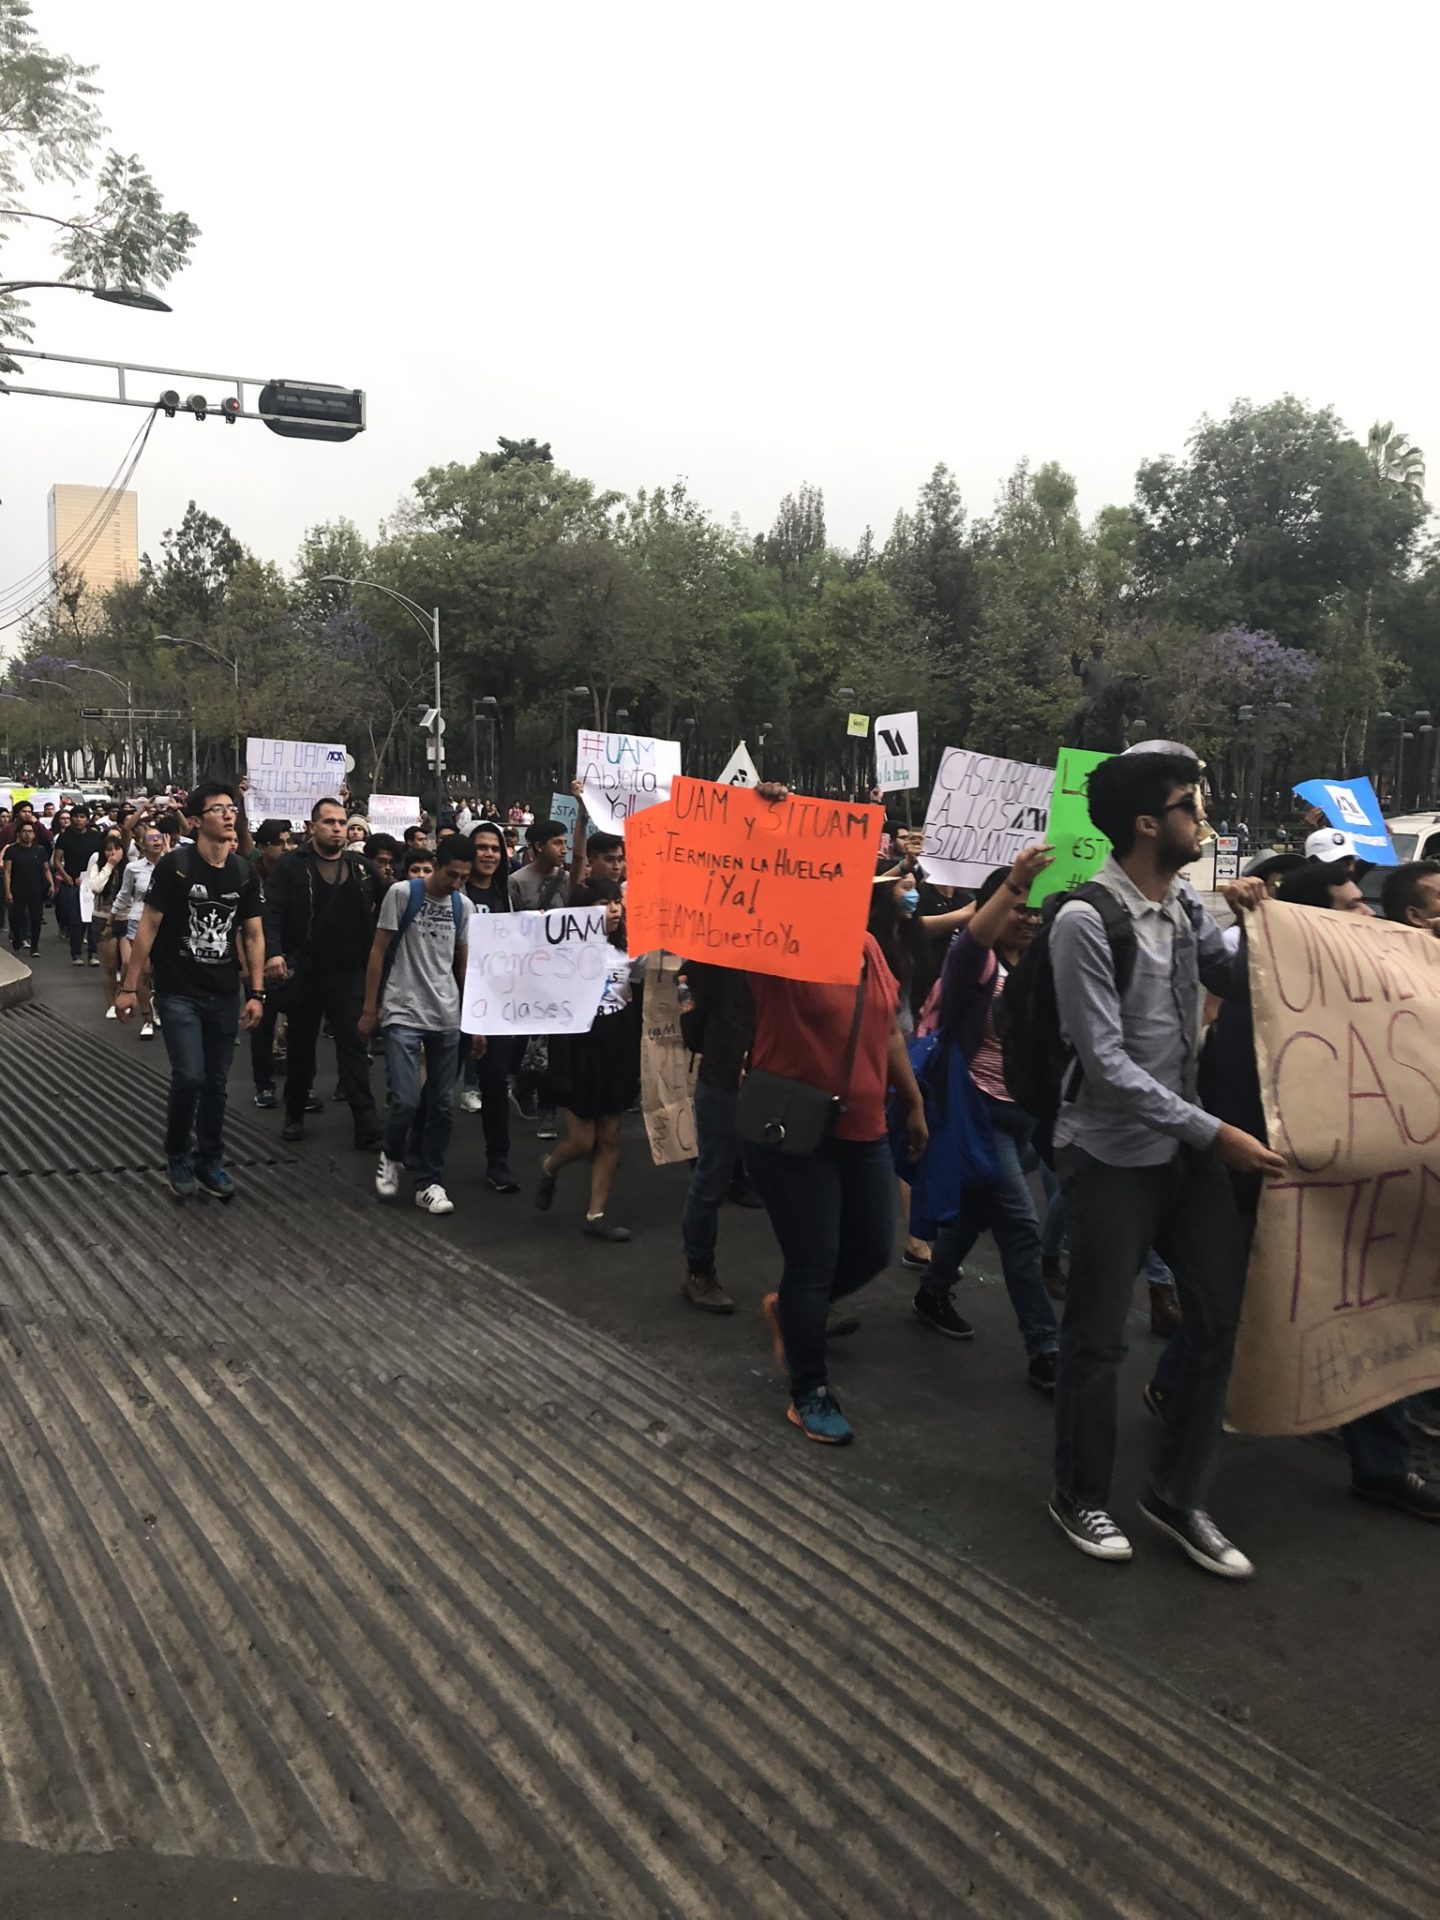 Protest on Reforma, Mexico City